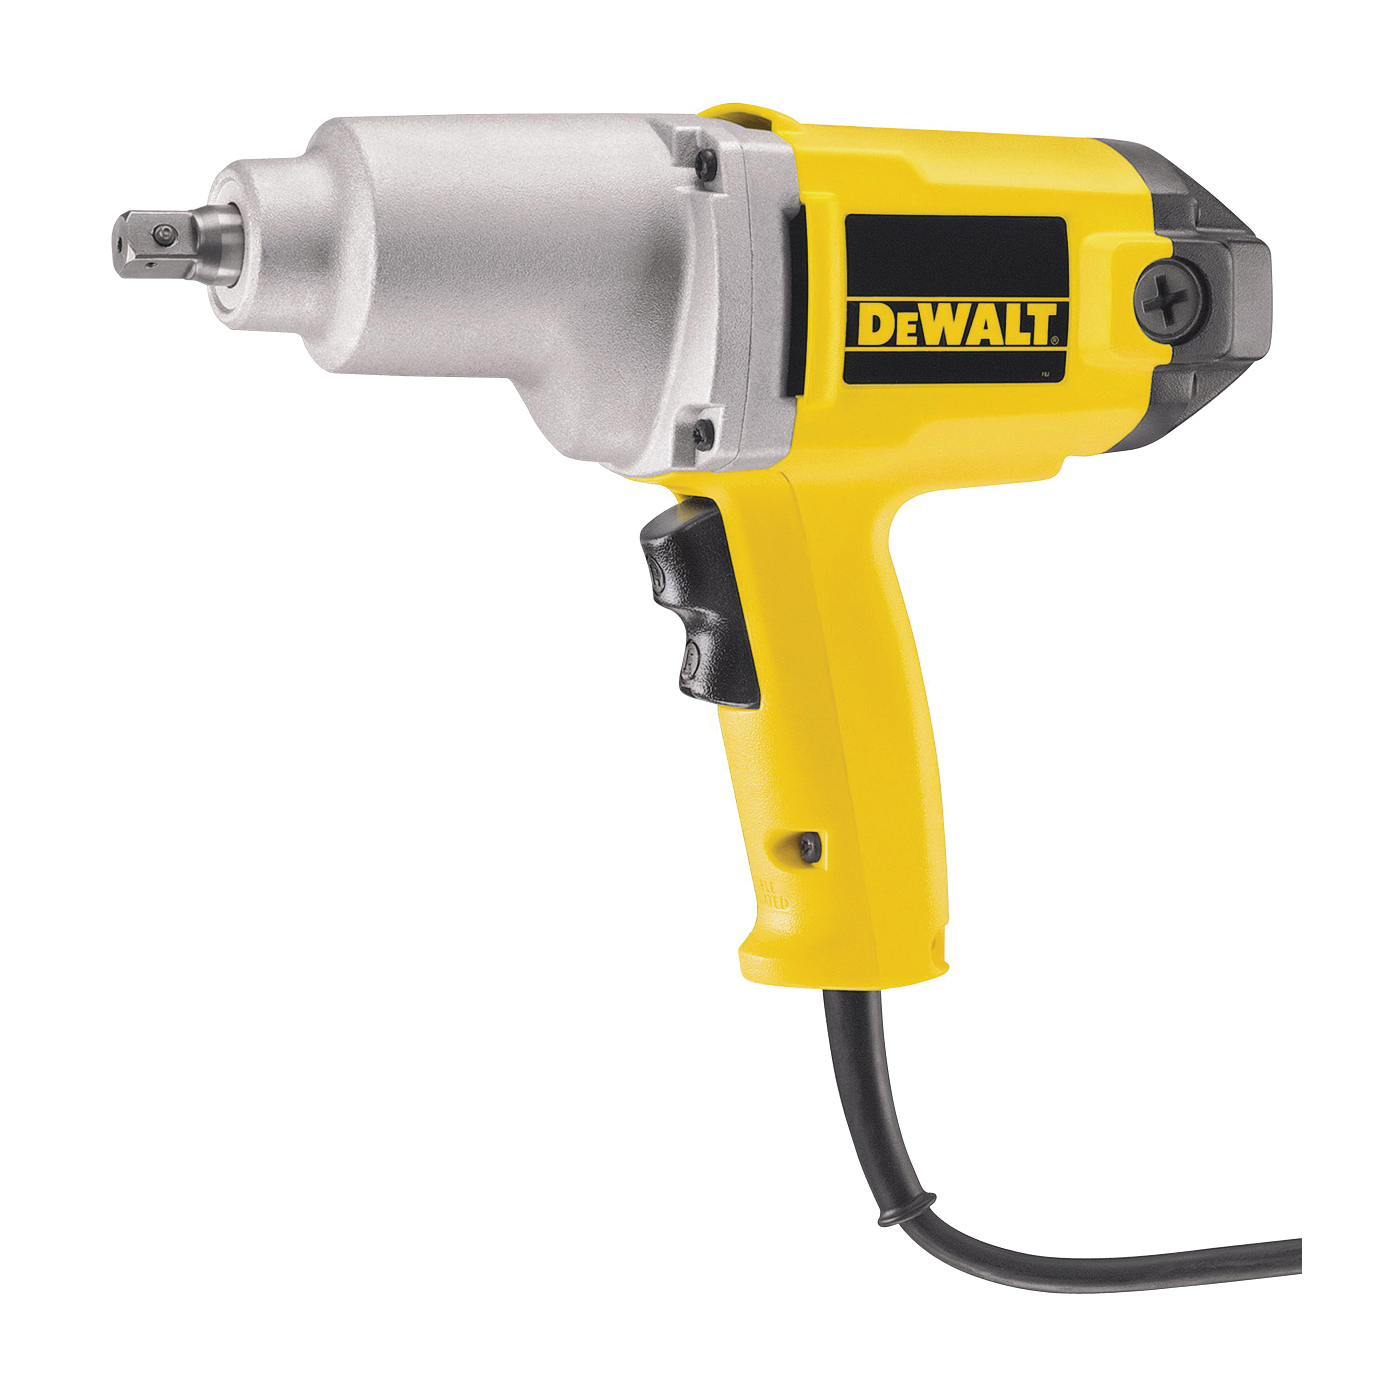 DeWALT DW292 Impact Wrench with Detent Pin Anvil, 7.5 A, 1/2 in Drive, Square Drive, 2700 ipm, 2100 rpm Speed - 1